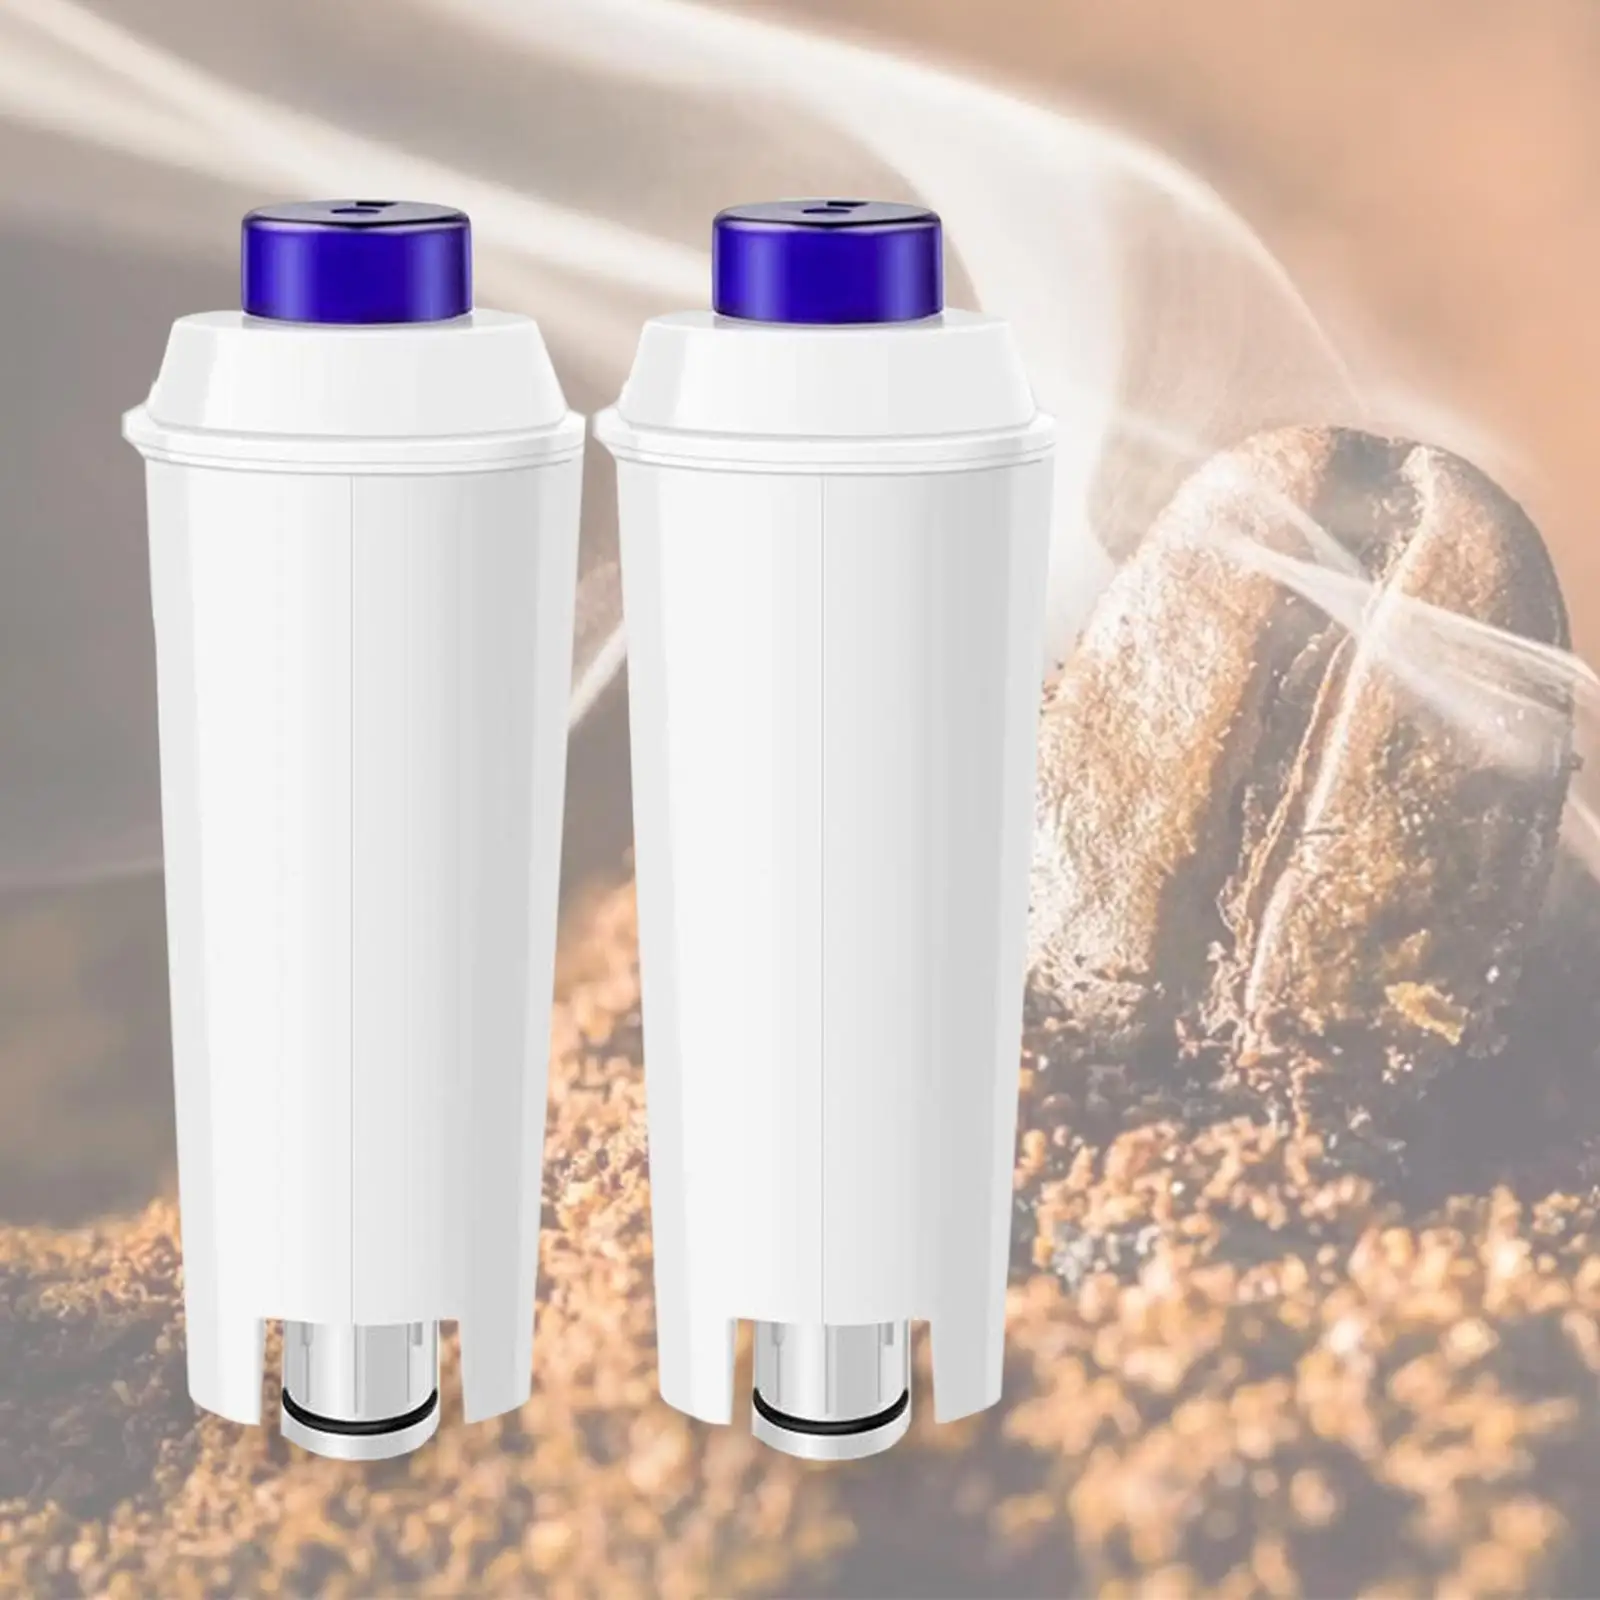 2Pcs Coffee Machine Water Filter Fittings Spare Coffee Maker Lightweight for Taste Filtration Cartridges Coffee Machines